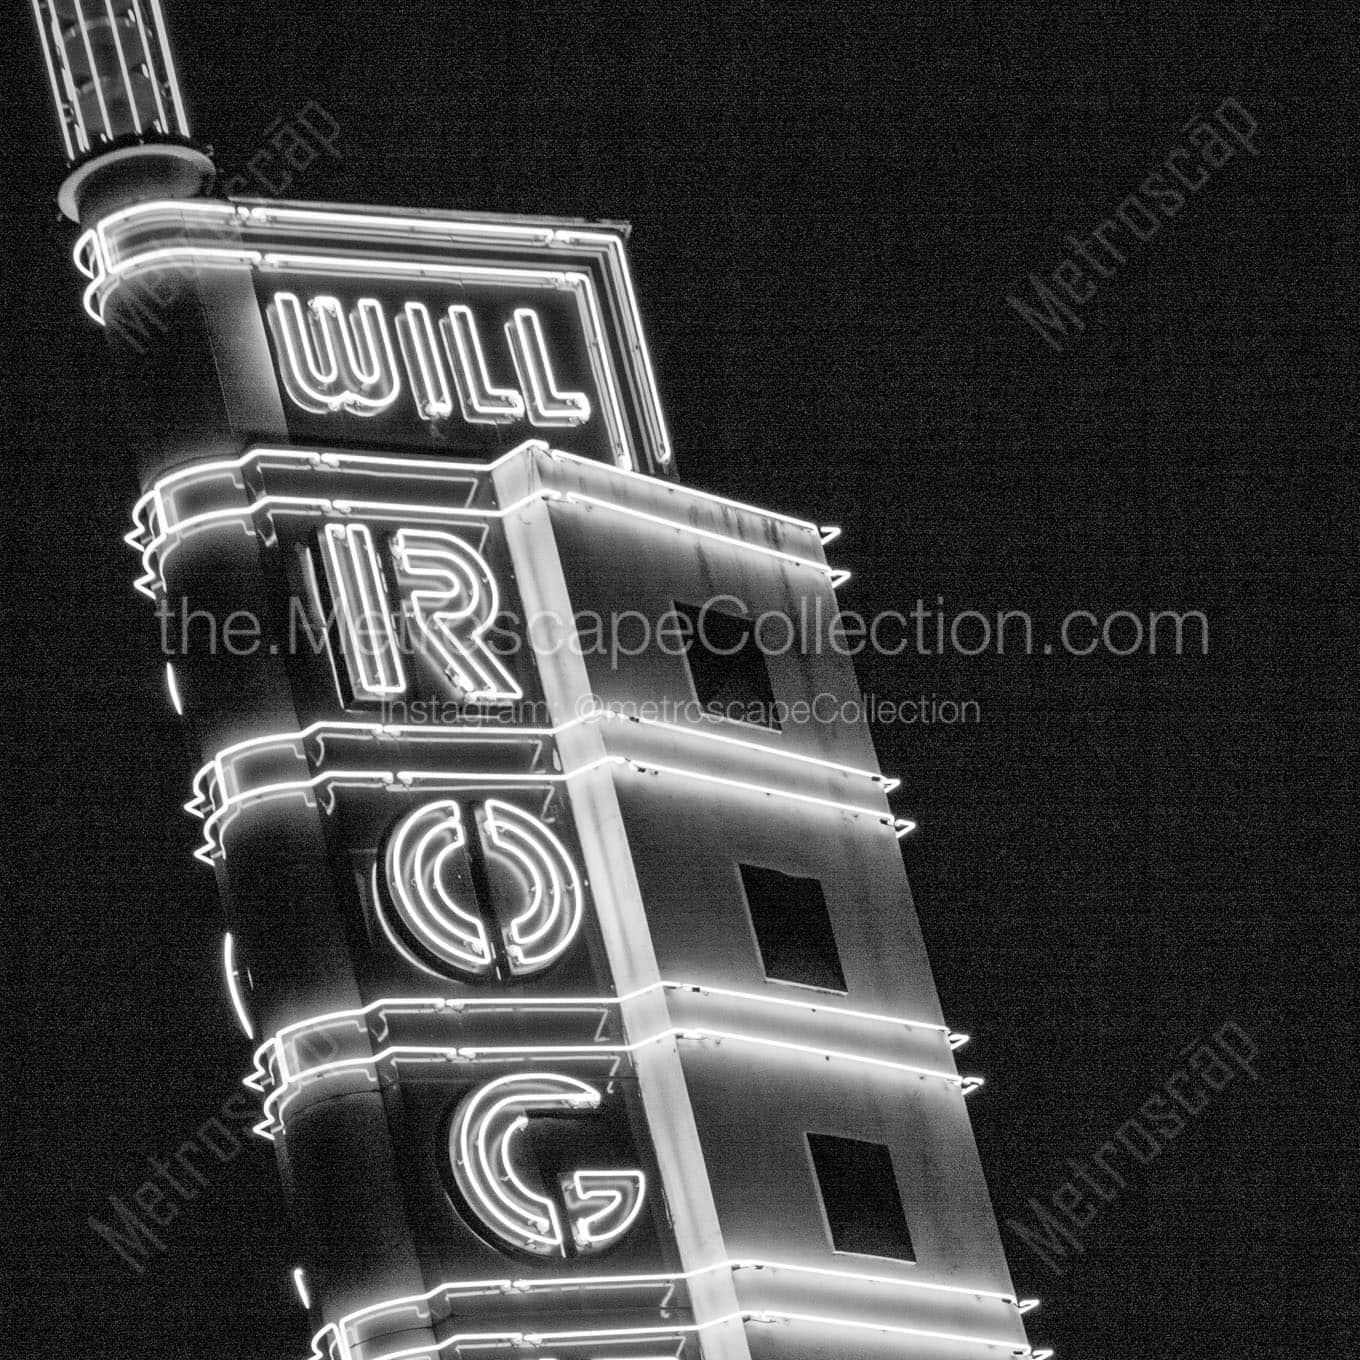 will rogers theater sign at night Black & White Office Art